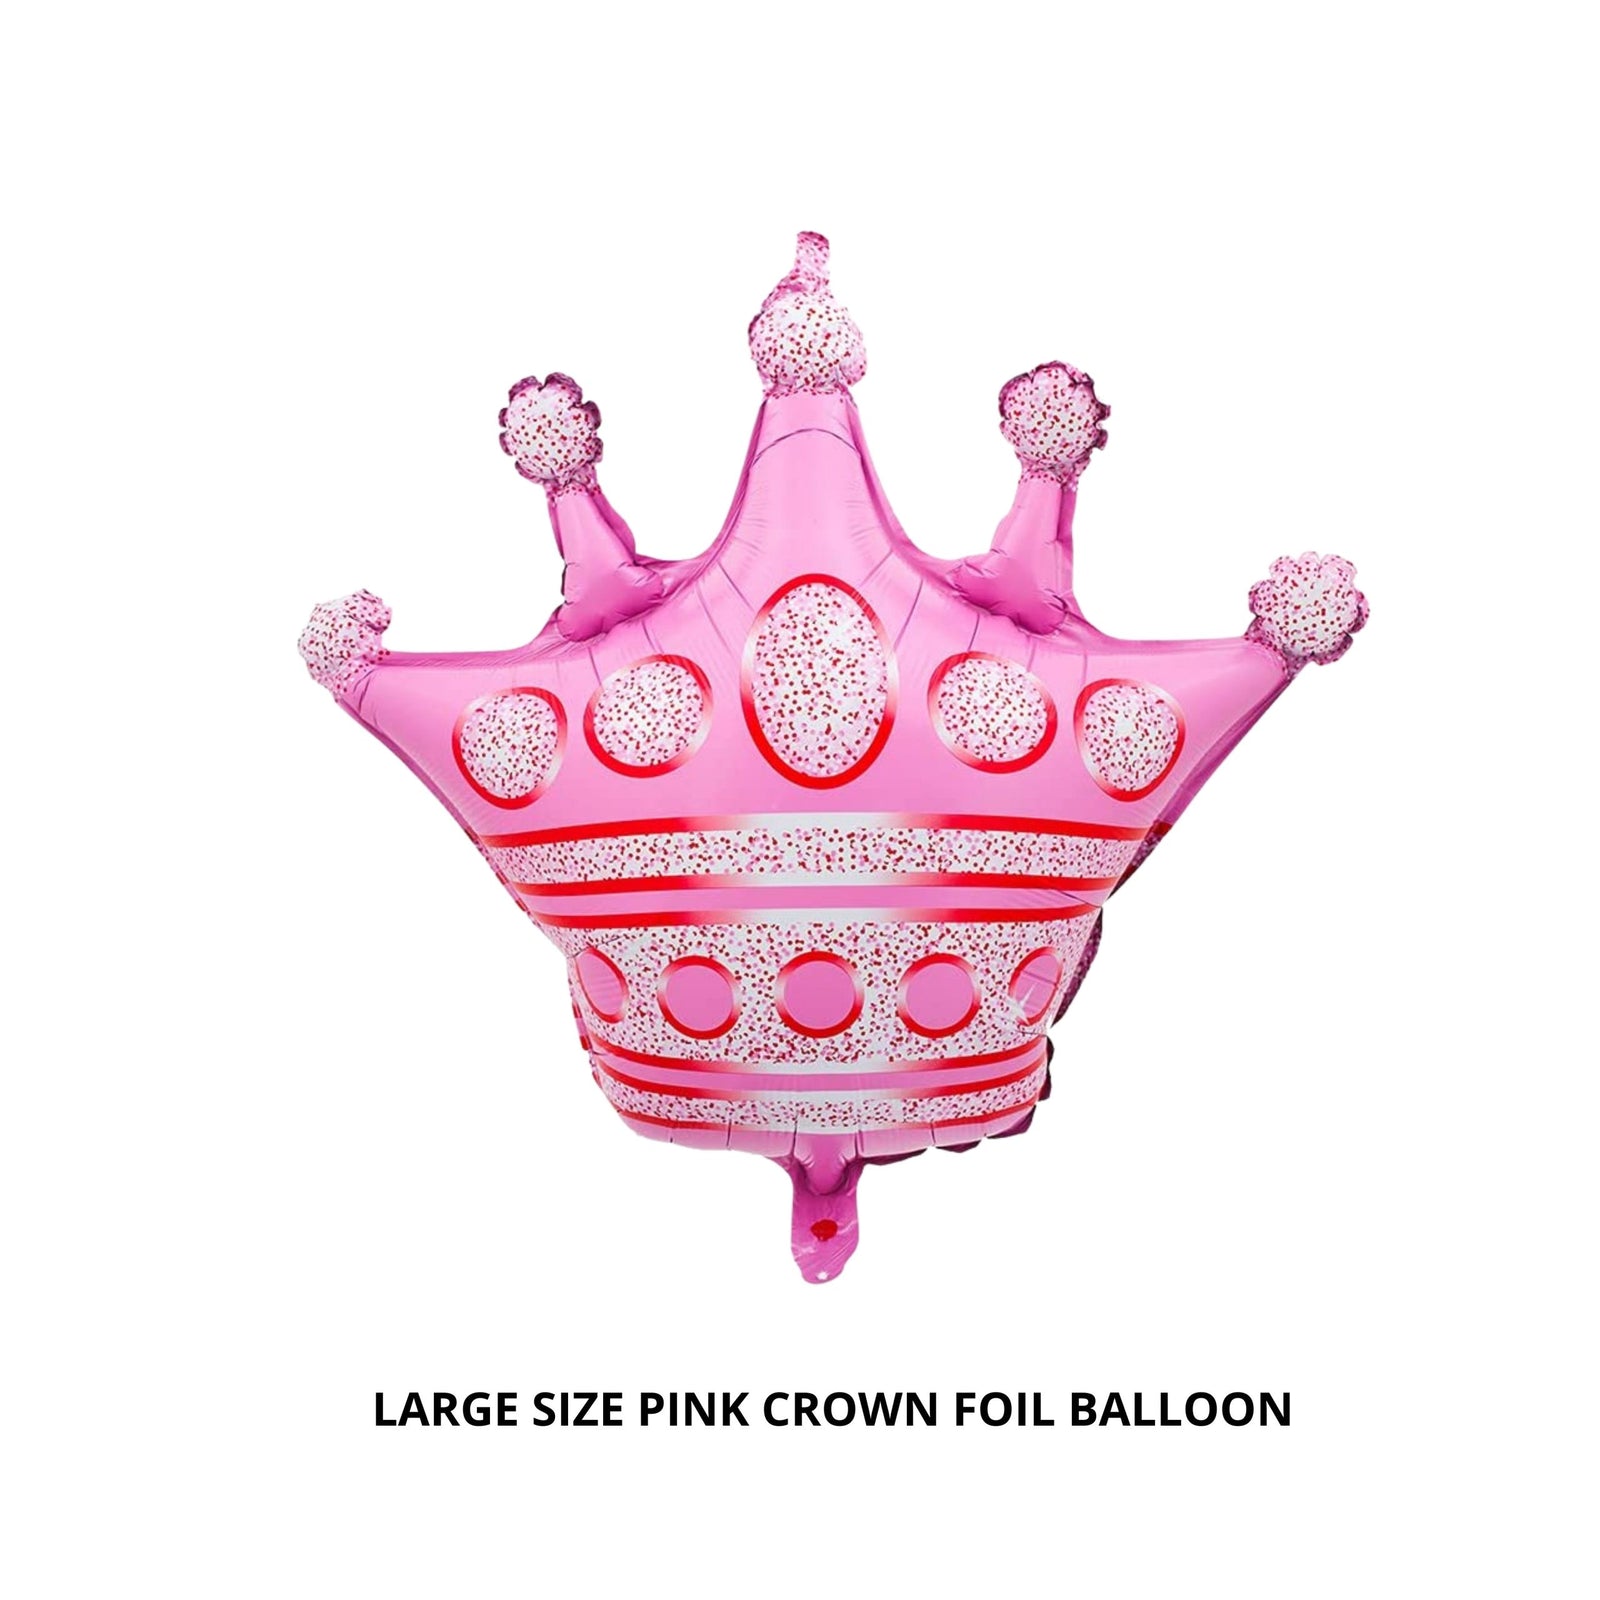 Pink Girls Princess Crown Foil Balloons Set for Girls Theme Birthday Party (set of 5)